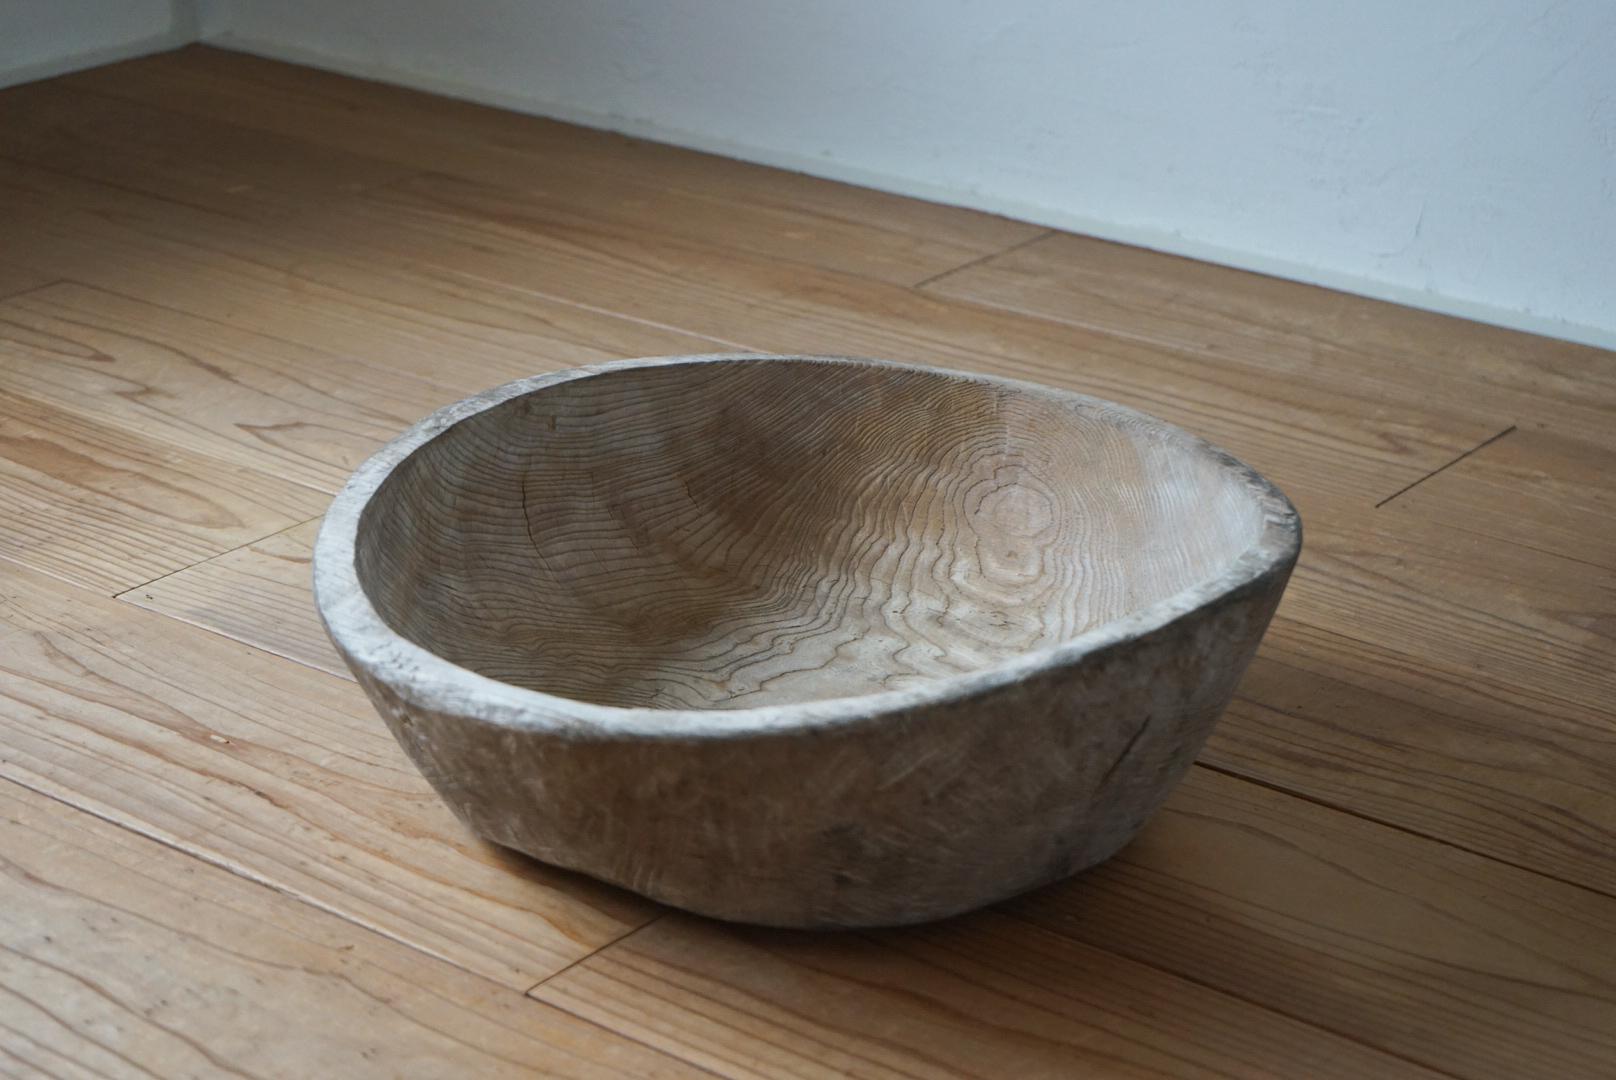 This is an old Japanese wooden bowl.
It is made of Sen wood.

Sen tree is an Asian tree with a grain similar to zelkova.

Since it is made by hand, it has a distorted shape. 
You can feel the handiwork of old craftsmen.

There are cracks in some